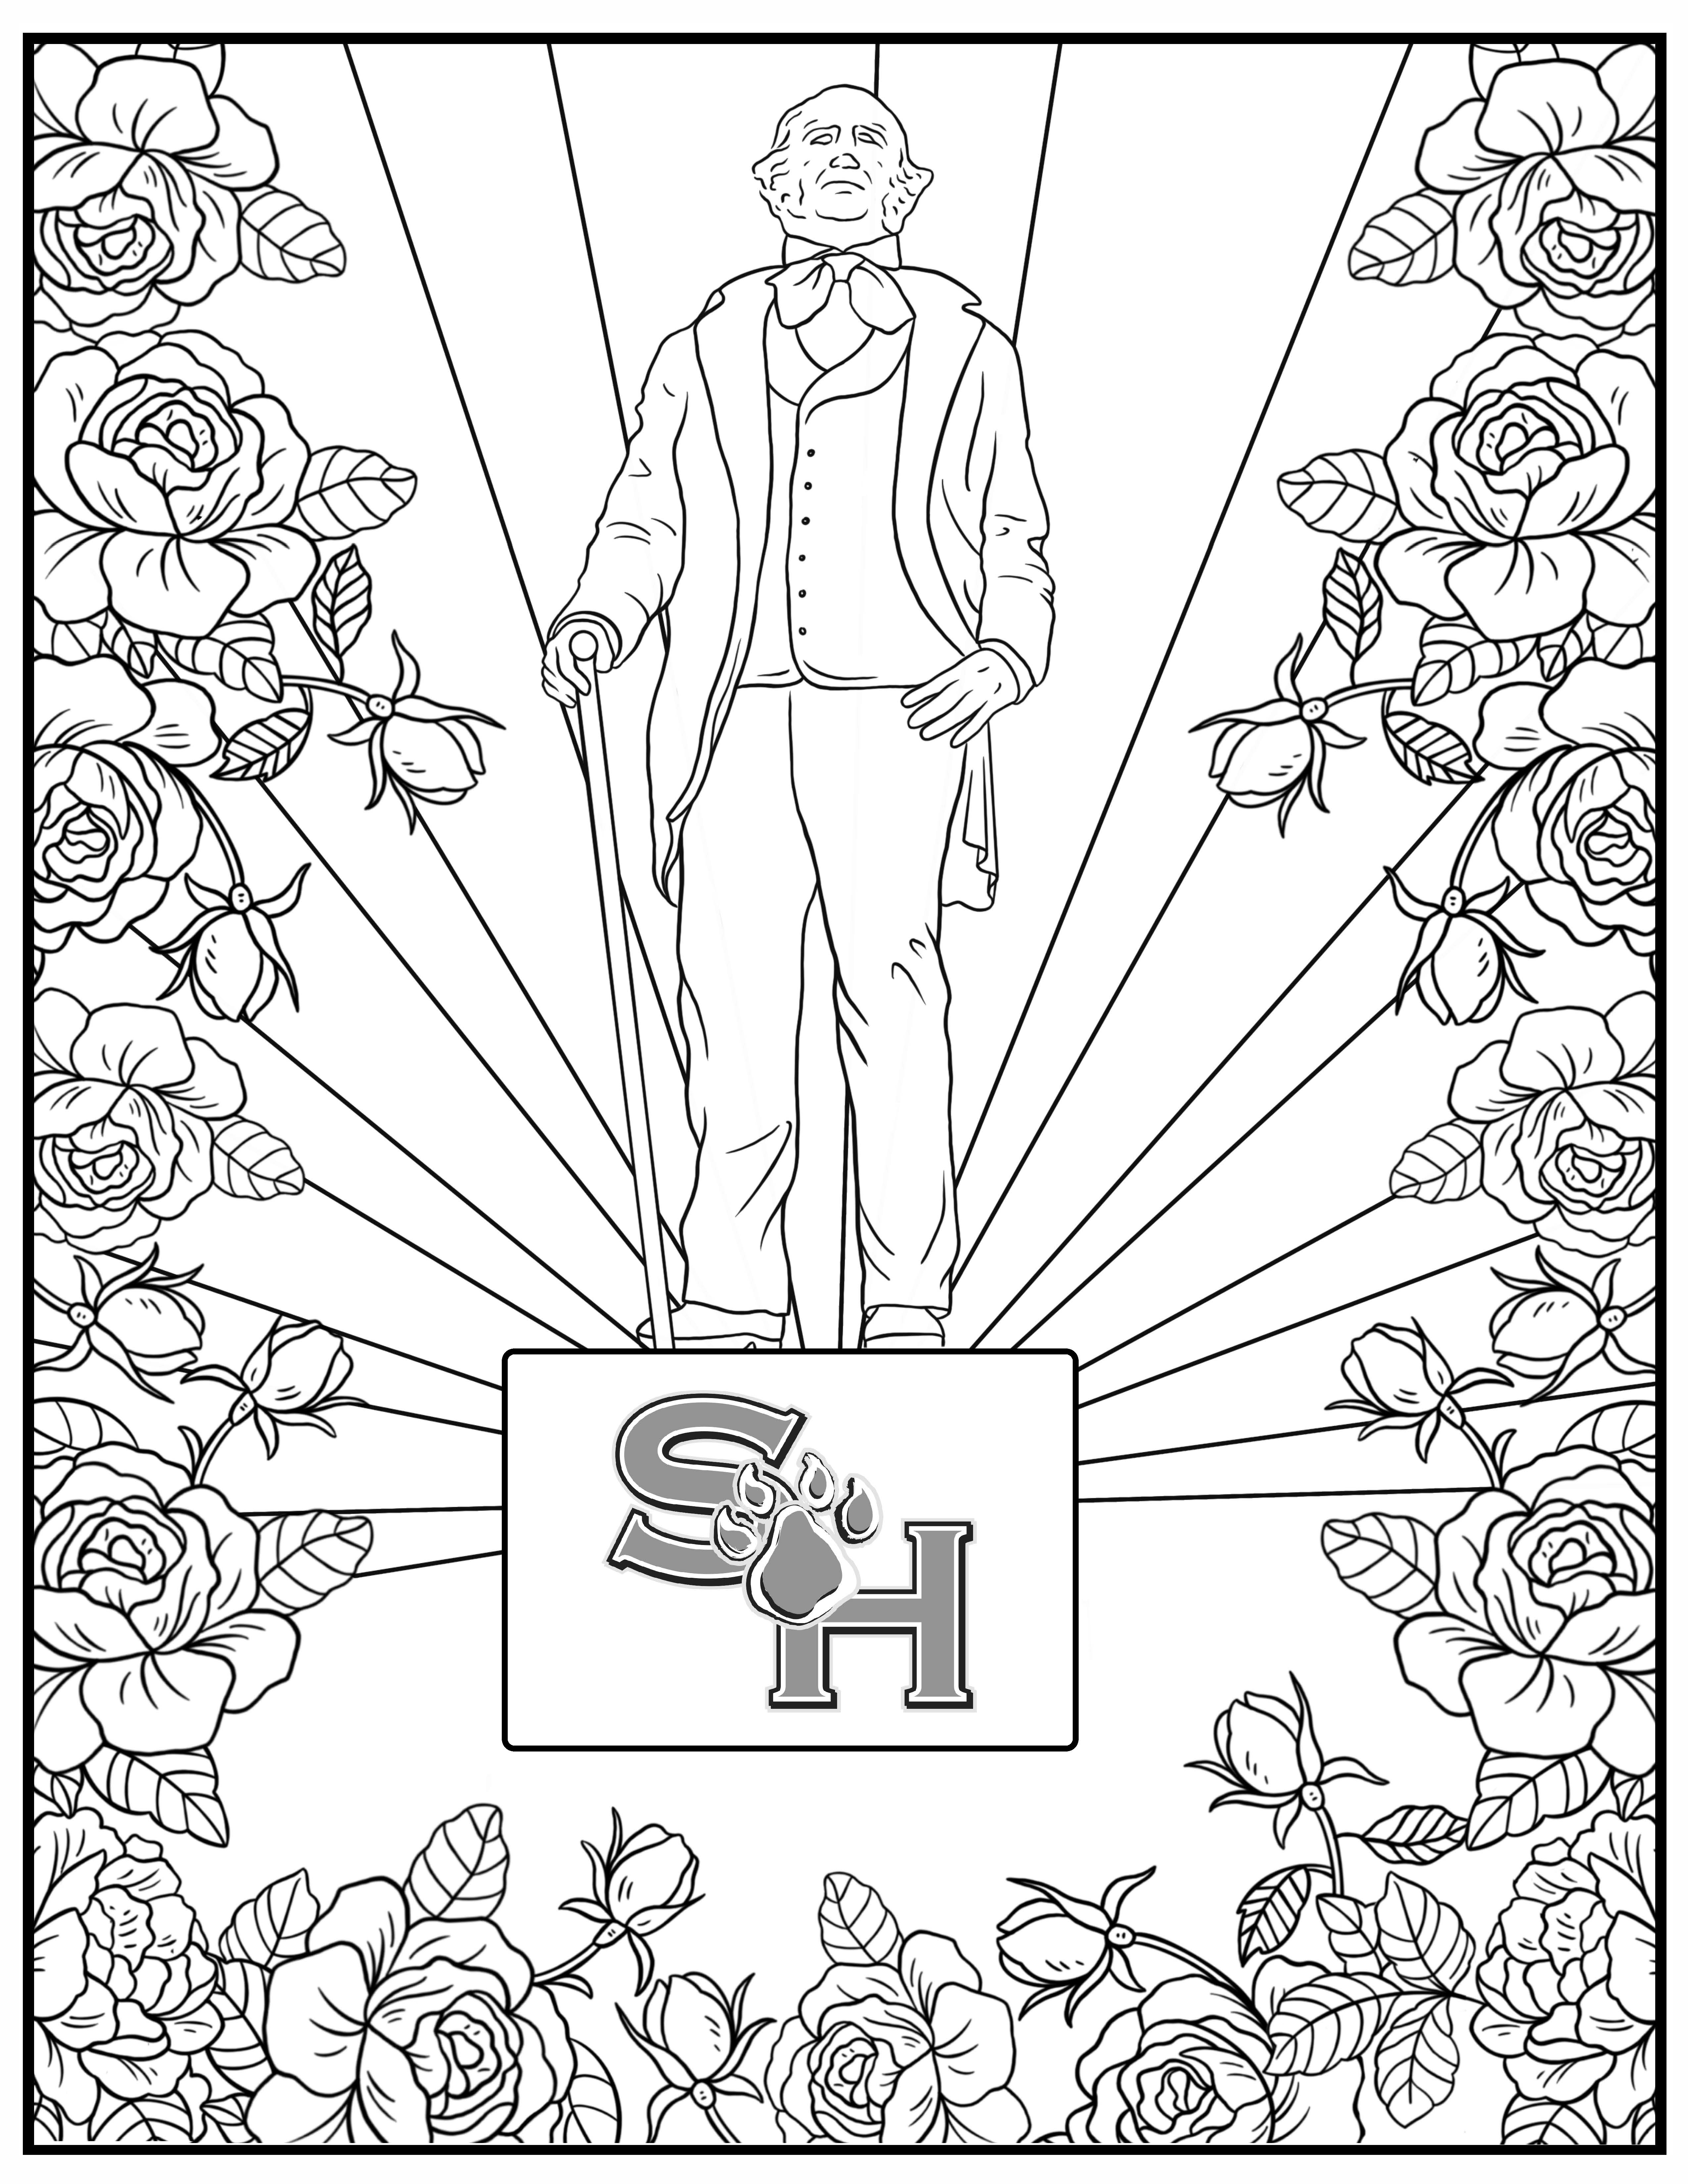 Student Activities Coloring Sheets_Page_3.png